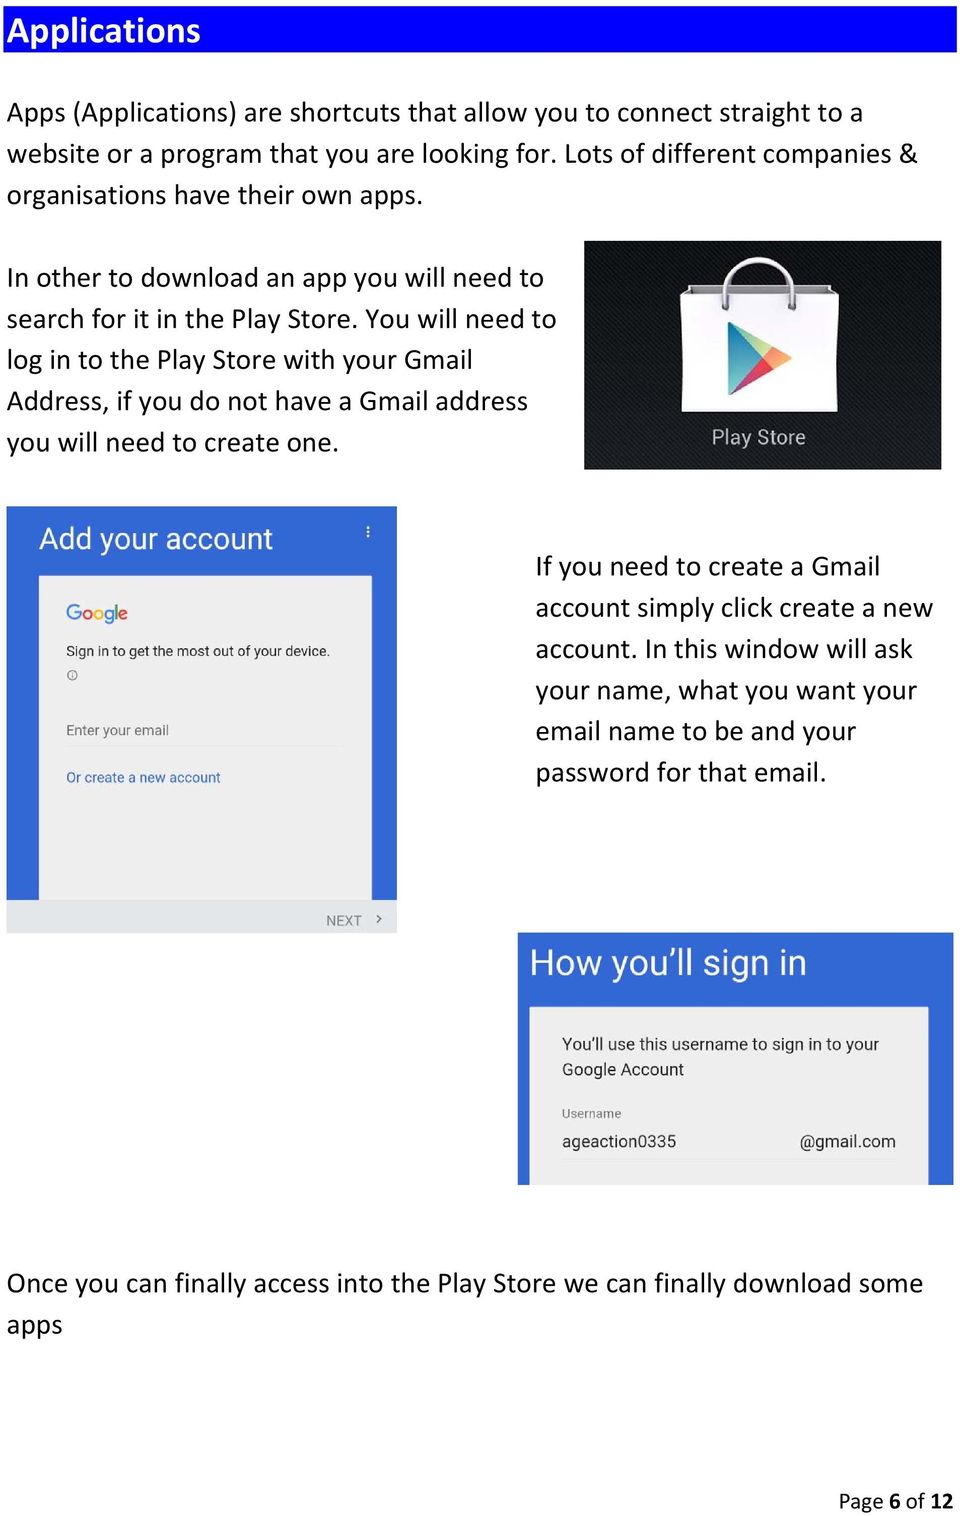 You will need to log in to the Play Store with your Gmail Address, if you do not have a Gmail address you will need to create one.